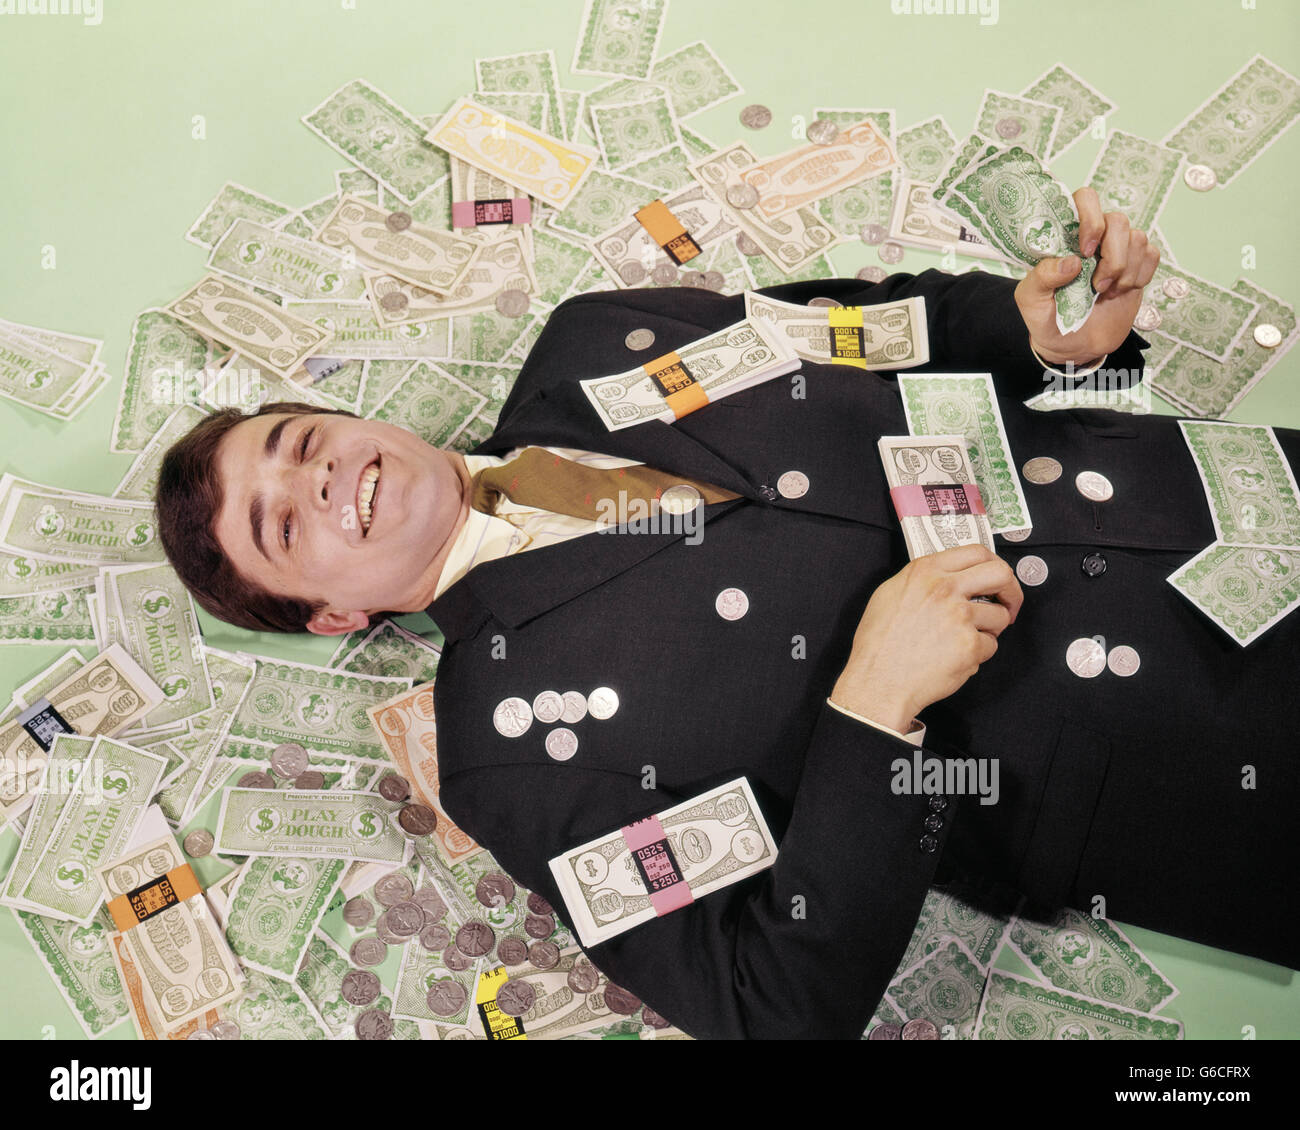 1960s SMILING MAN LYING ON FLOOR COVERED WITH FAKE MONEY Stock Photo